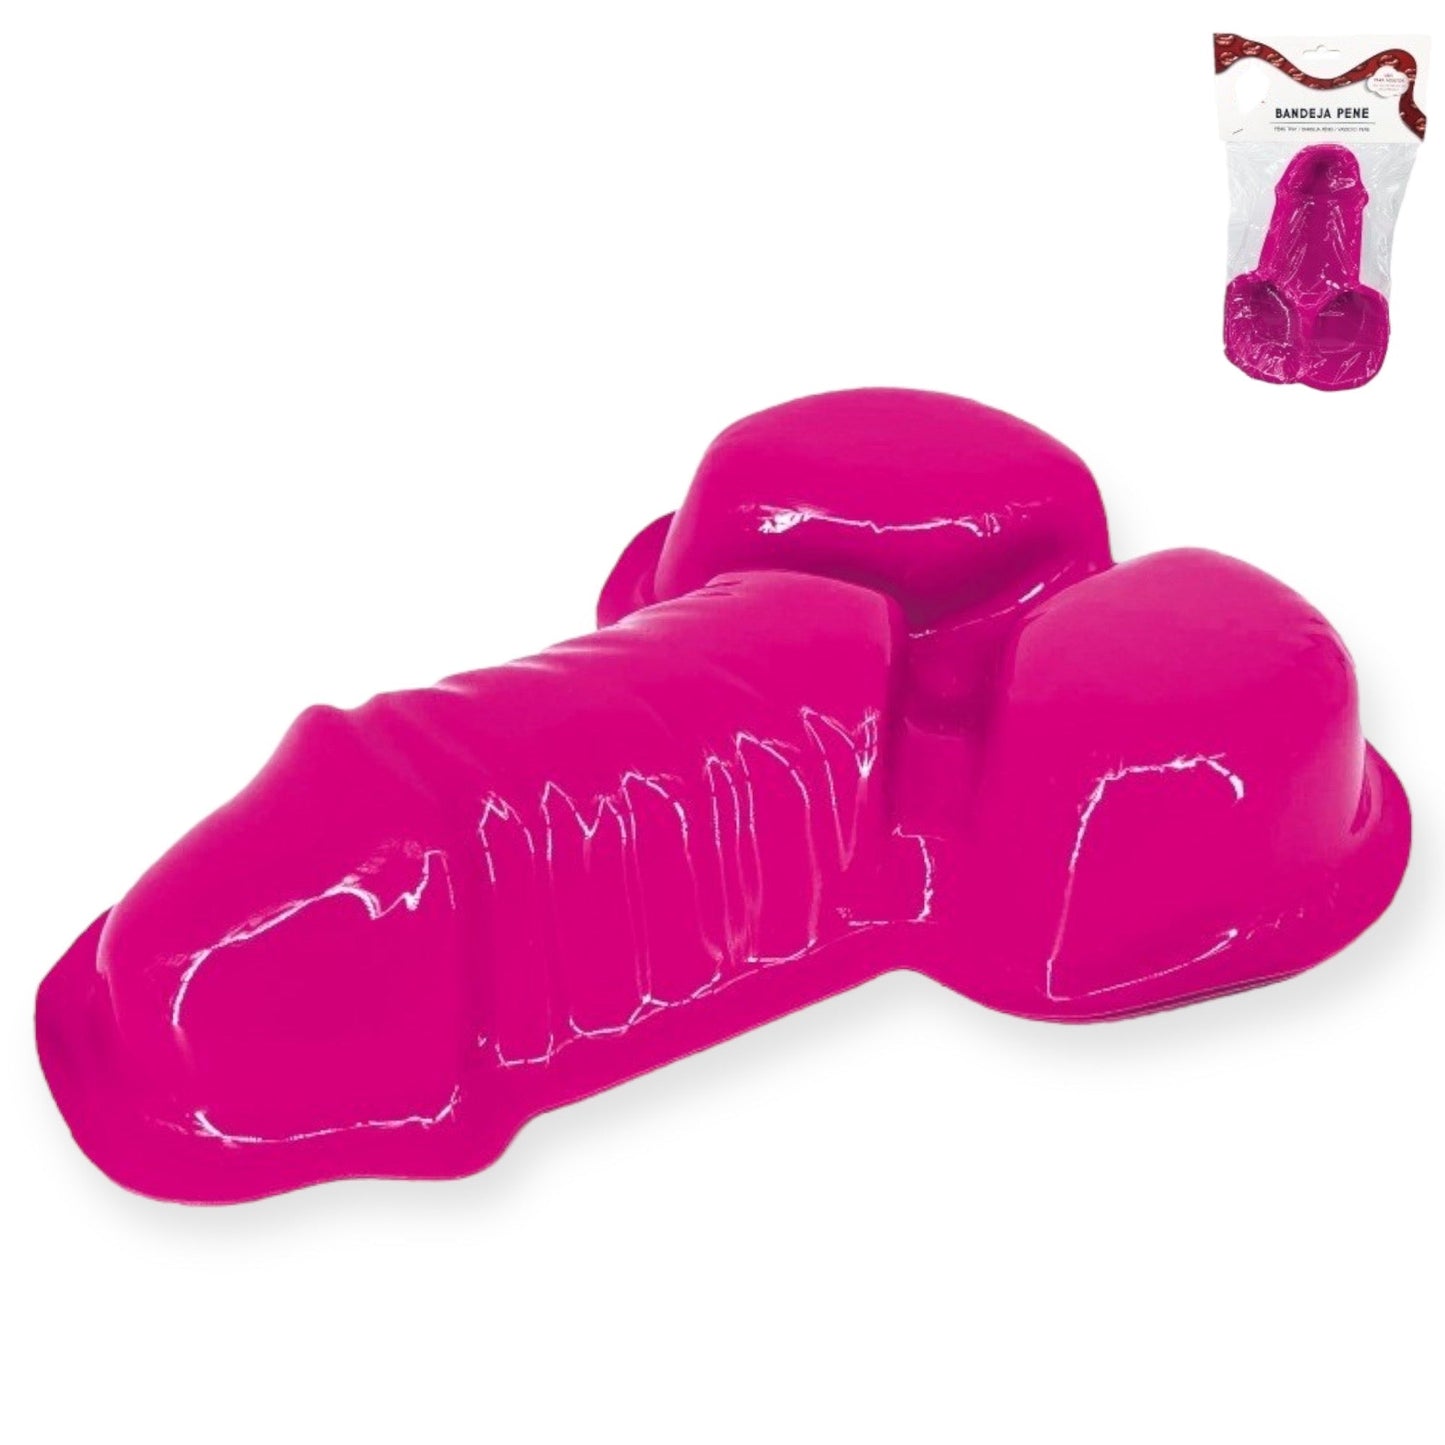 Kinky Pleasure - PL048 - Penis-shaped containers for parties 2pcs - 1 Piece